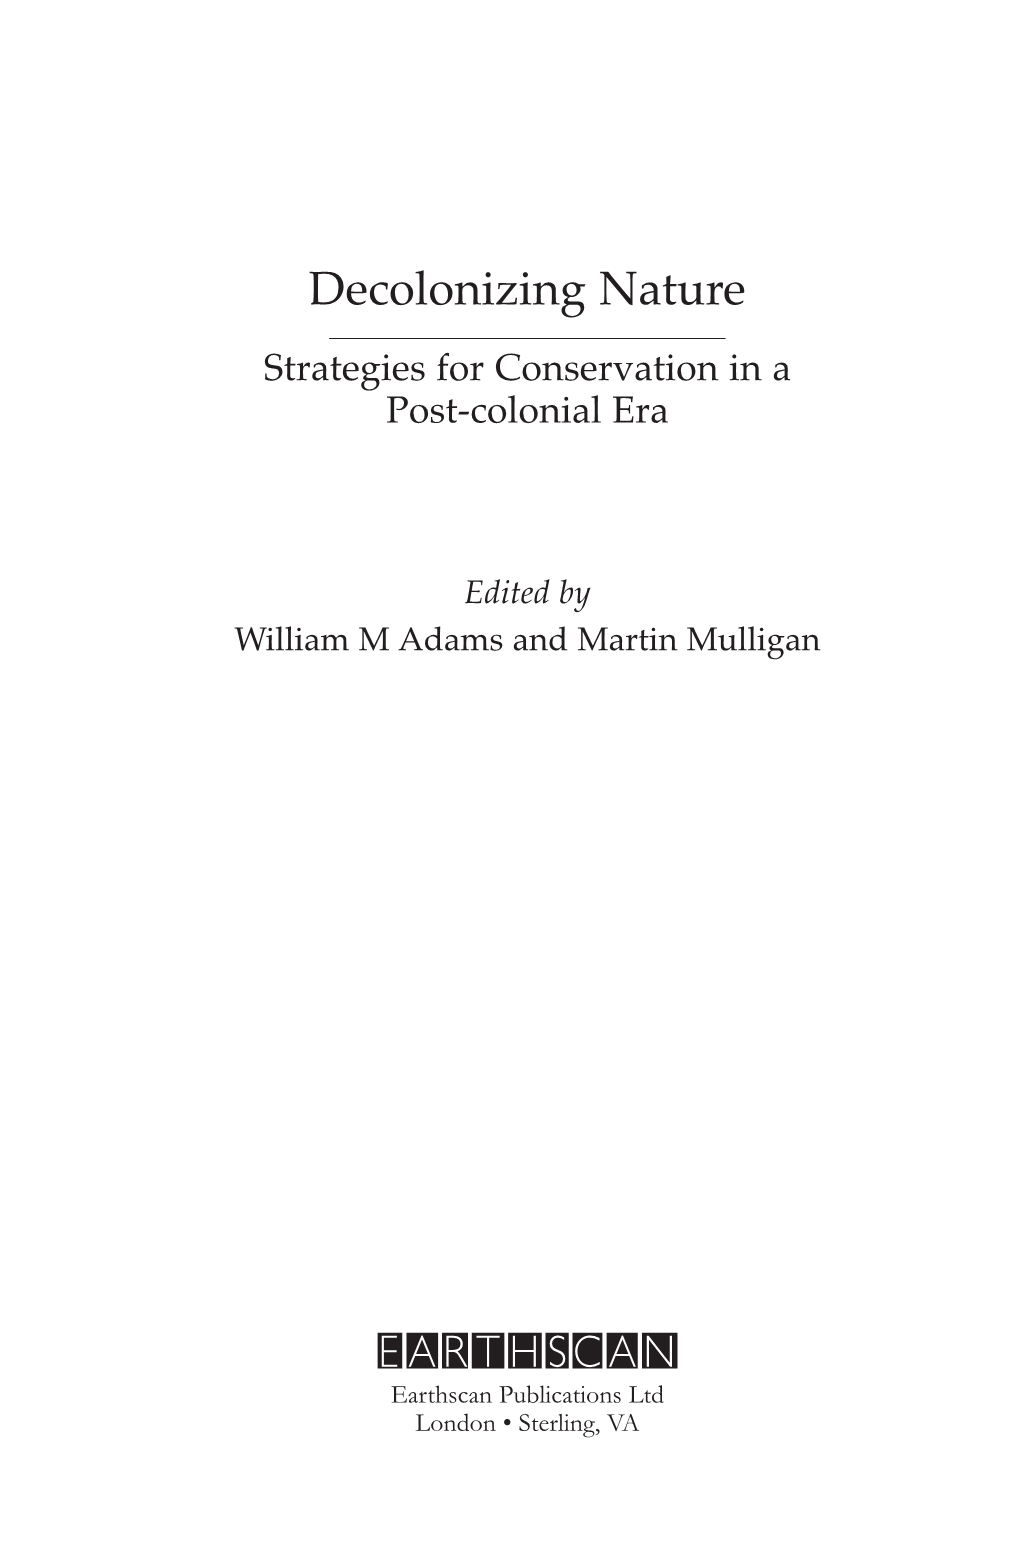 Decolonizing Nature: Strategies for Conservation in a Post-Colonial